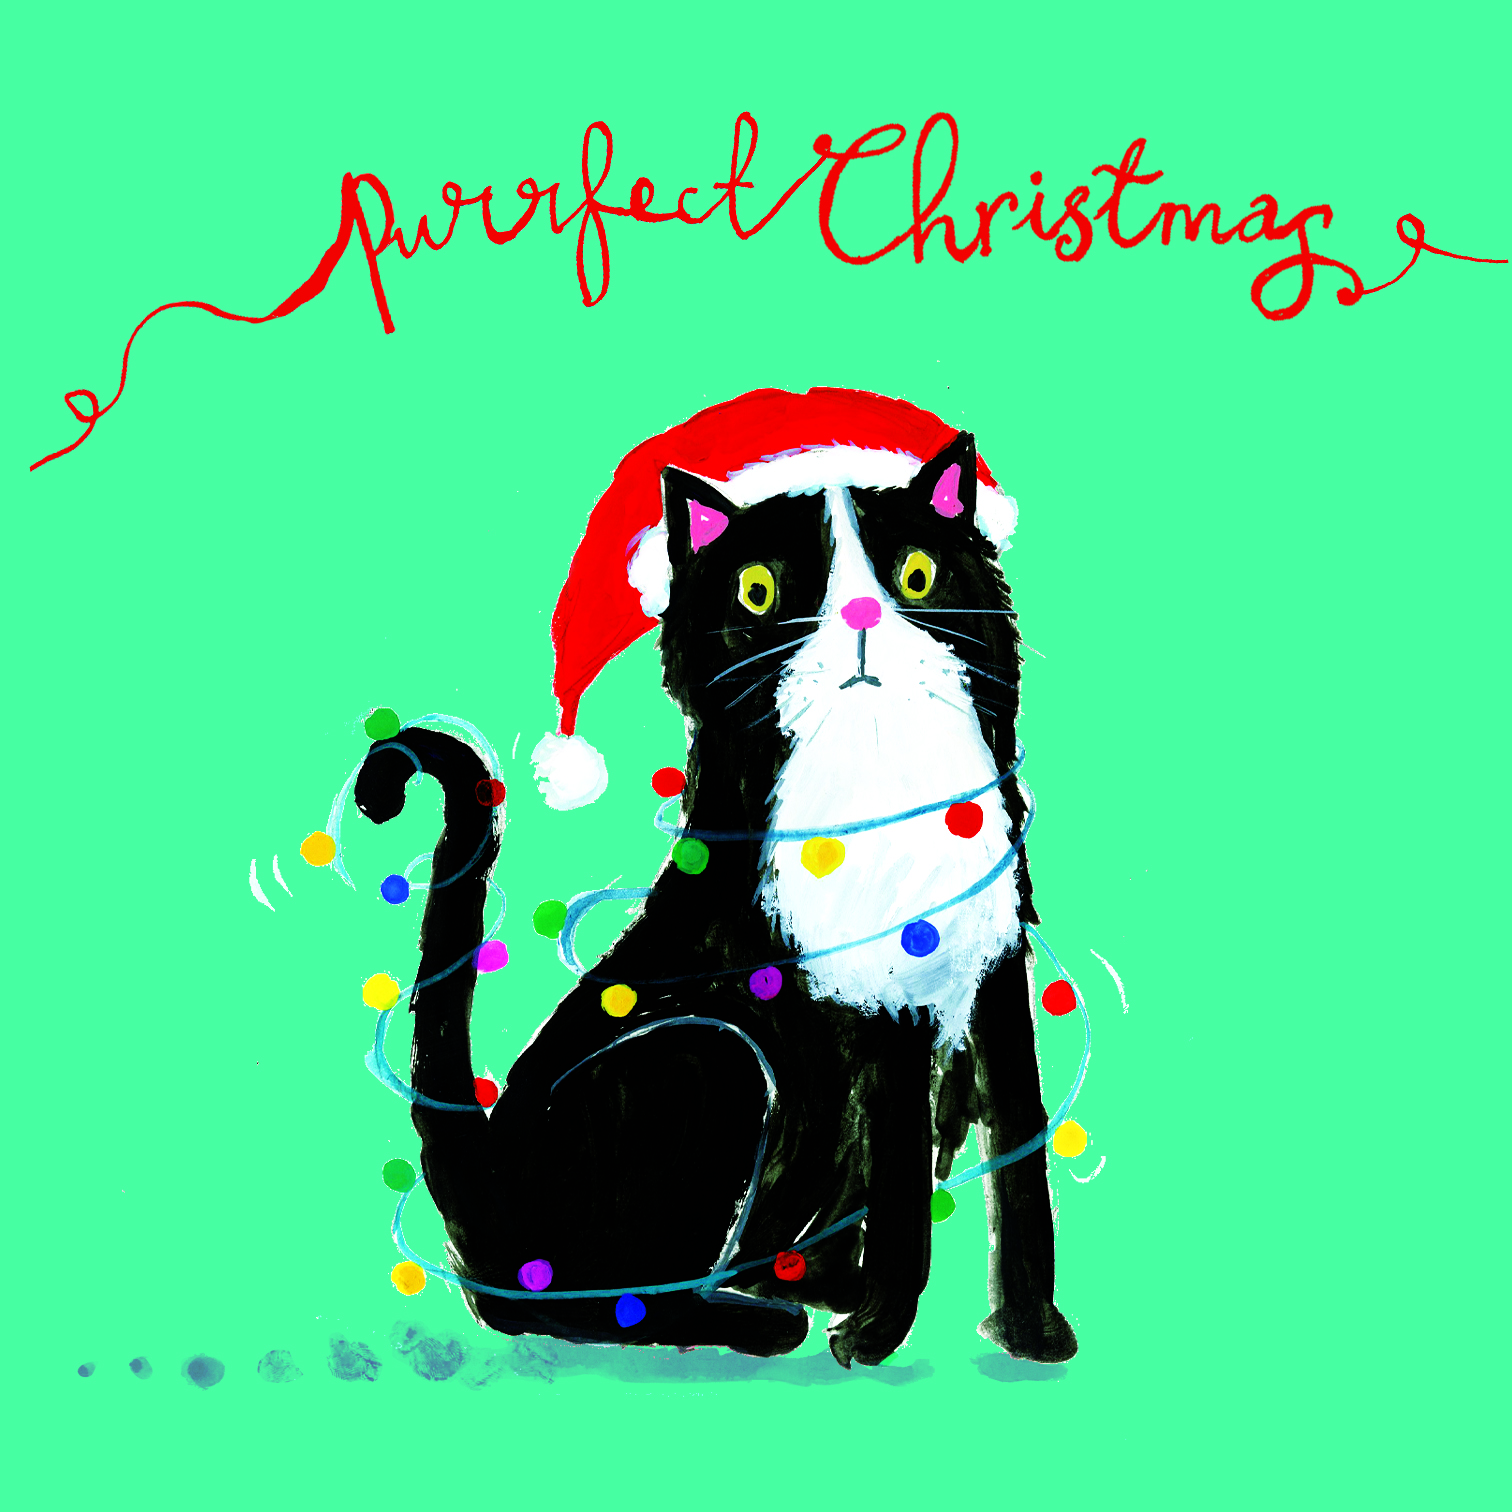 Puurfect Christmas Card